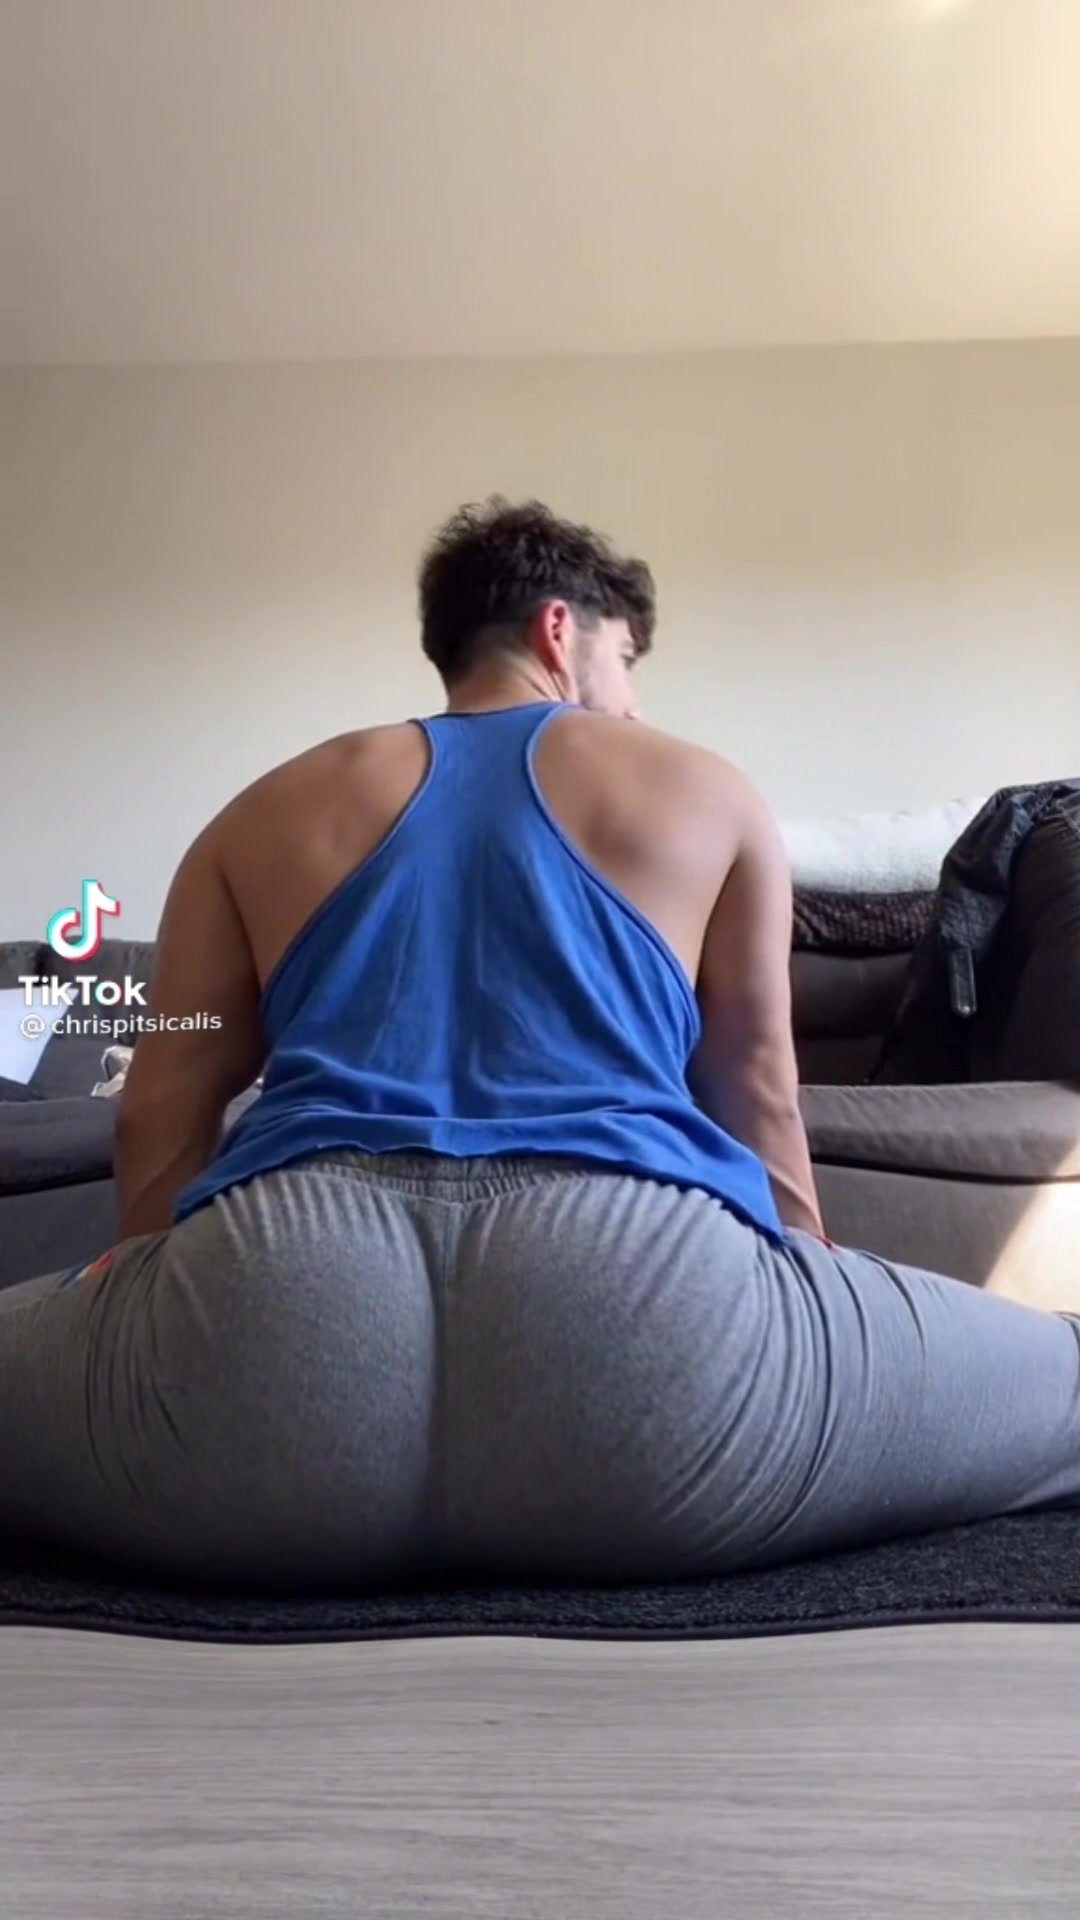 Bubble Booty Porn - Bubble Butt Growth - video 2 - ThisVid.com